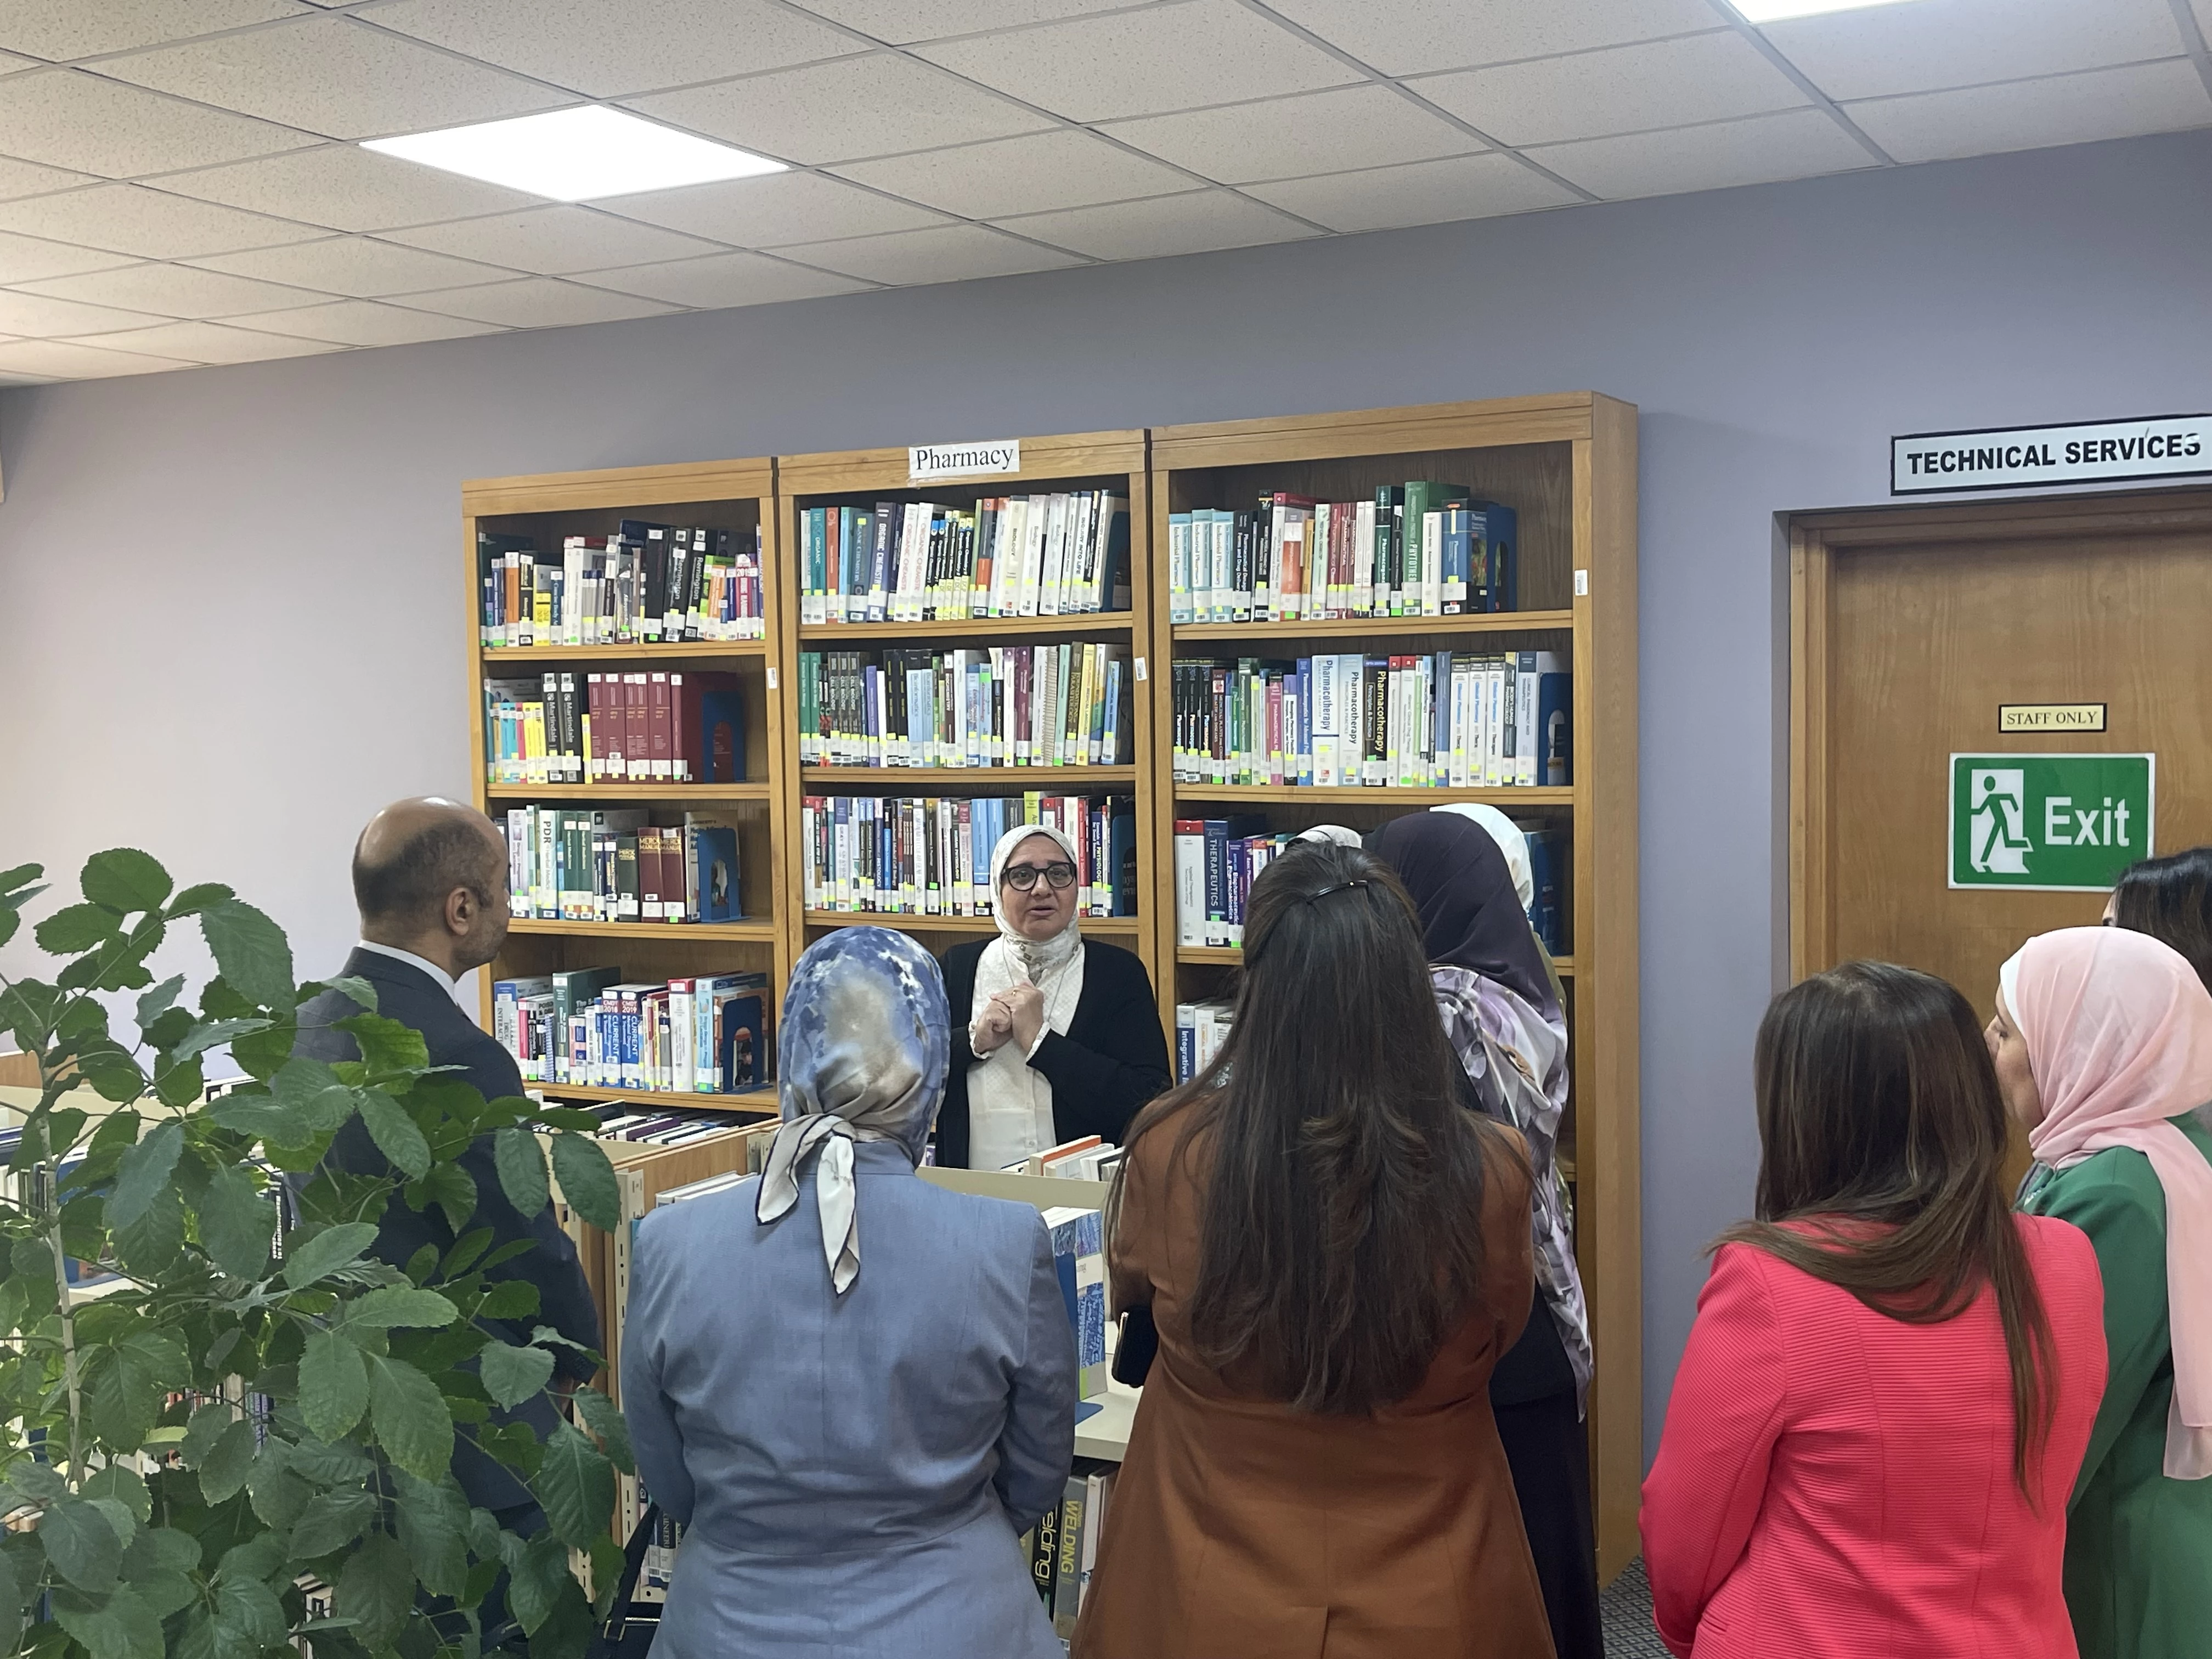 A visit from The Pharmaceutical Studies Sector Committee in the Supreme council of Universities2